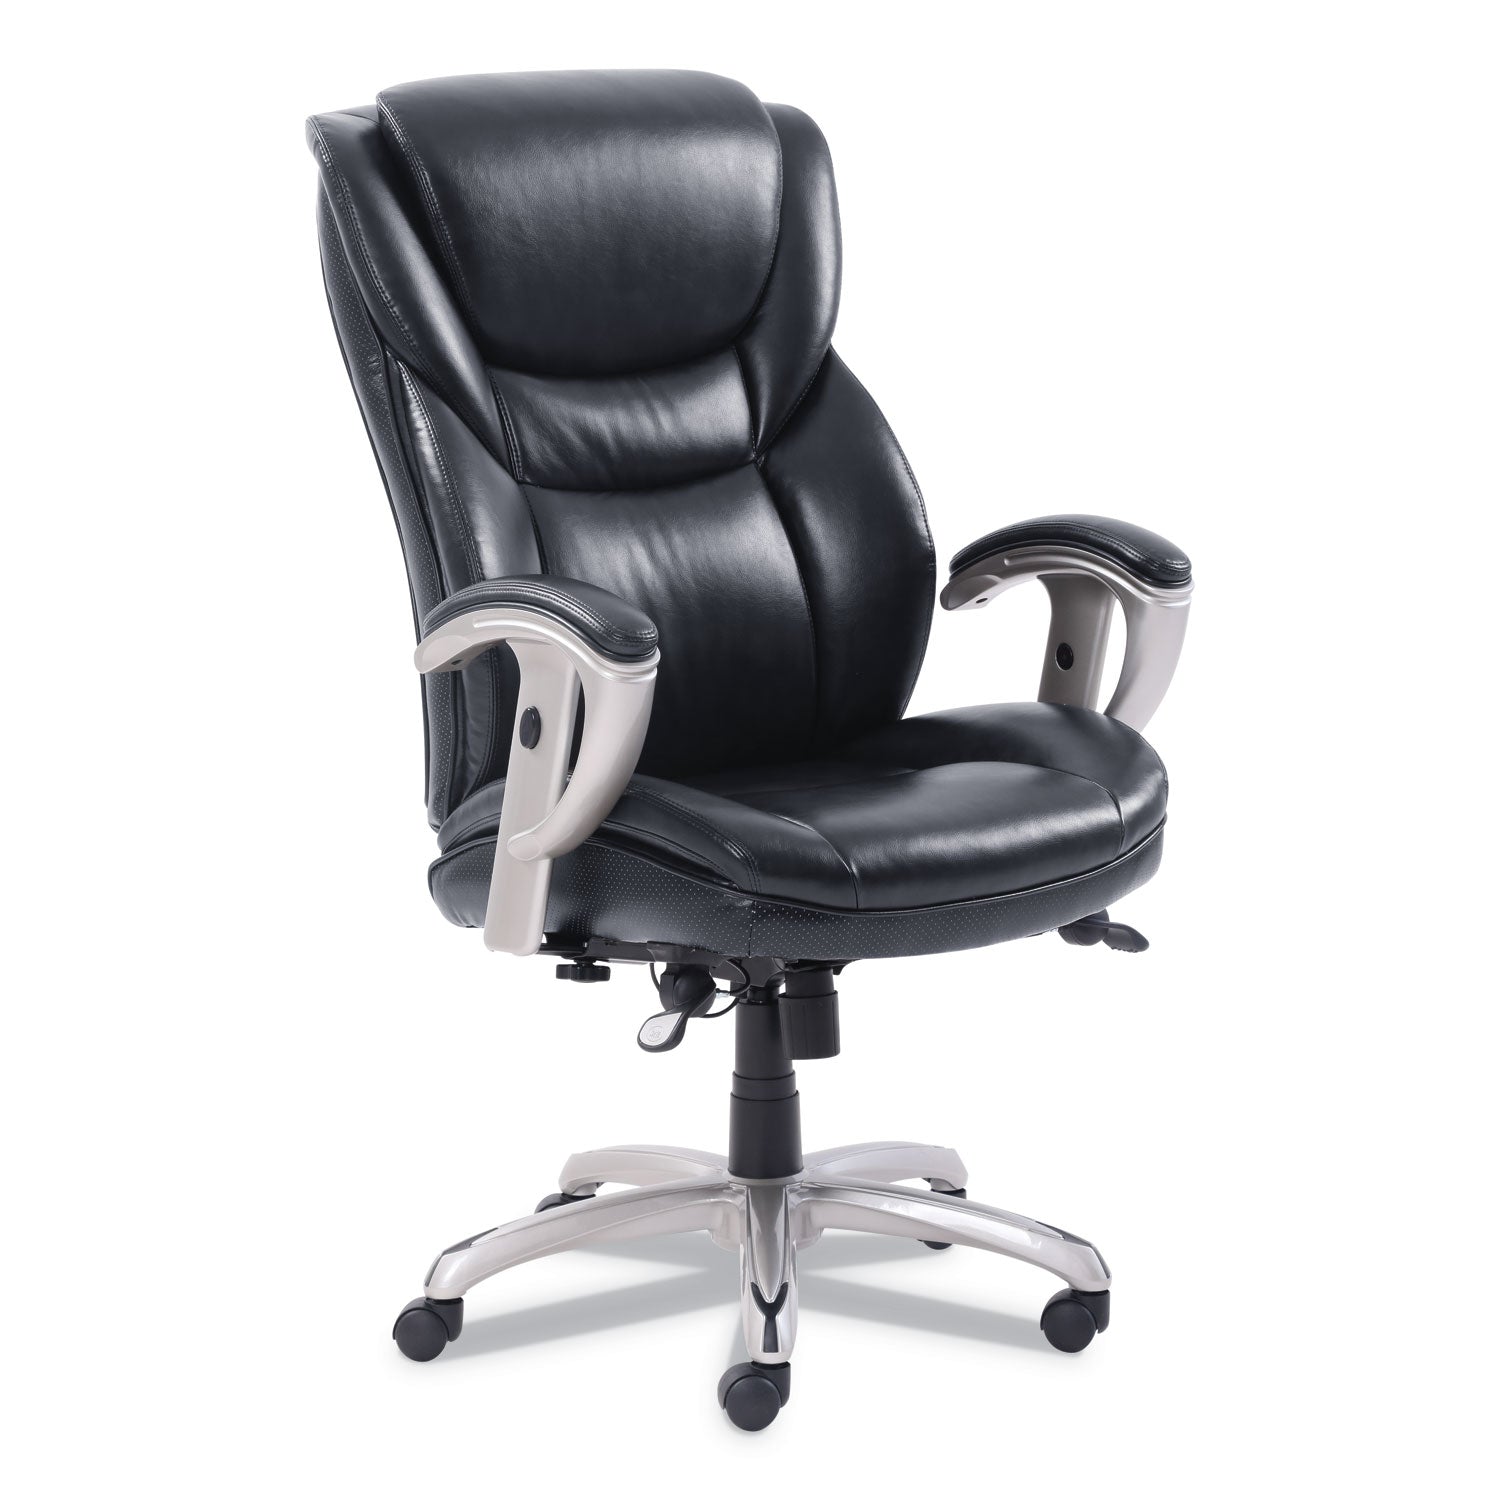 emerson-executive-task-chair-supports-up-to-300-lb-19-to-22-seat-height-black-seat-back-silver-base_srj49710blk - 1